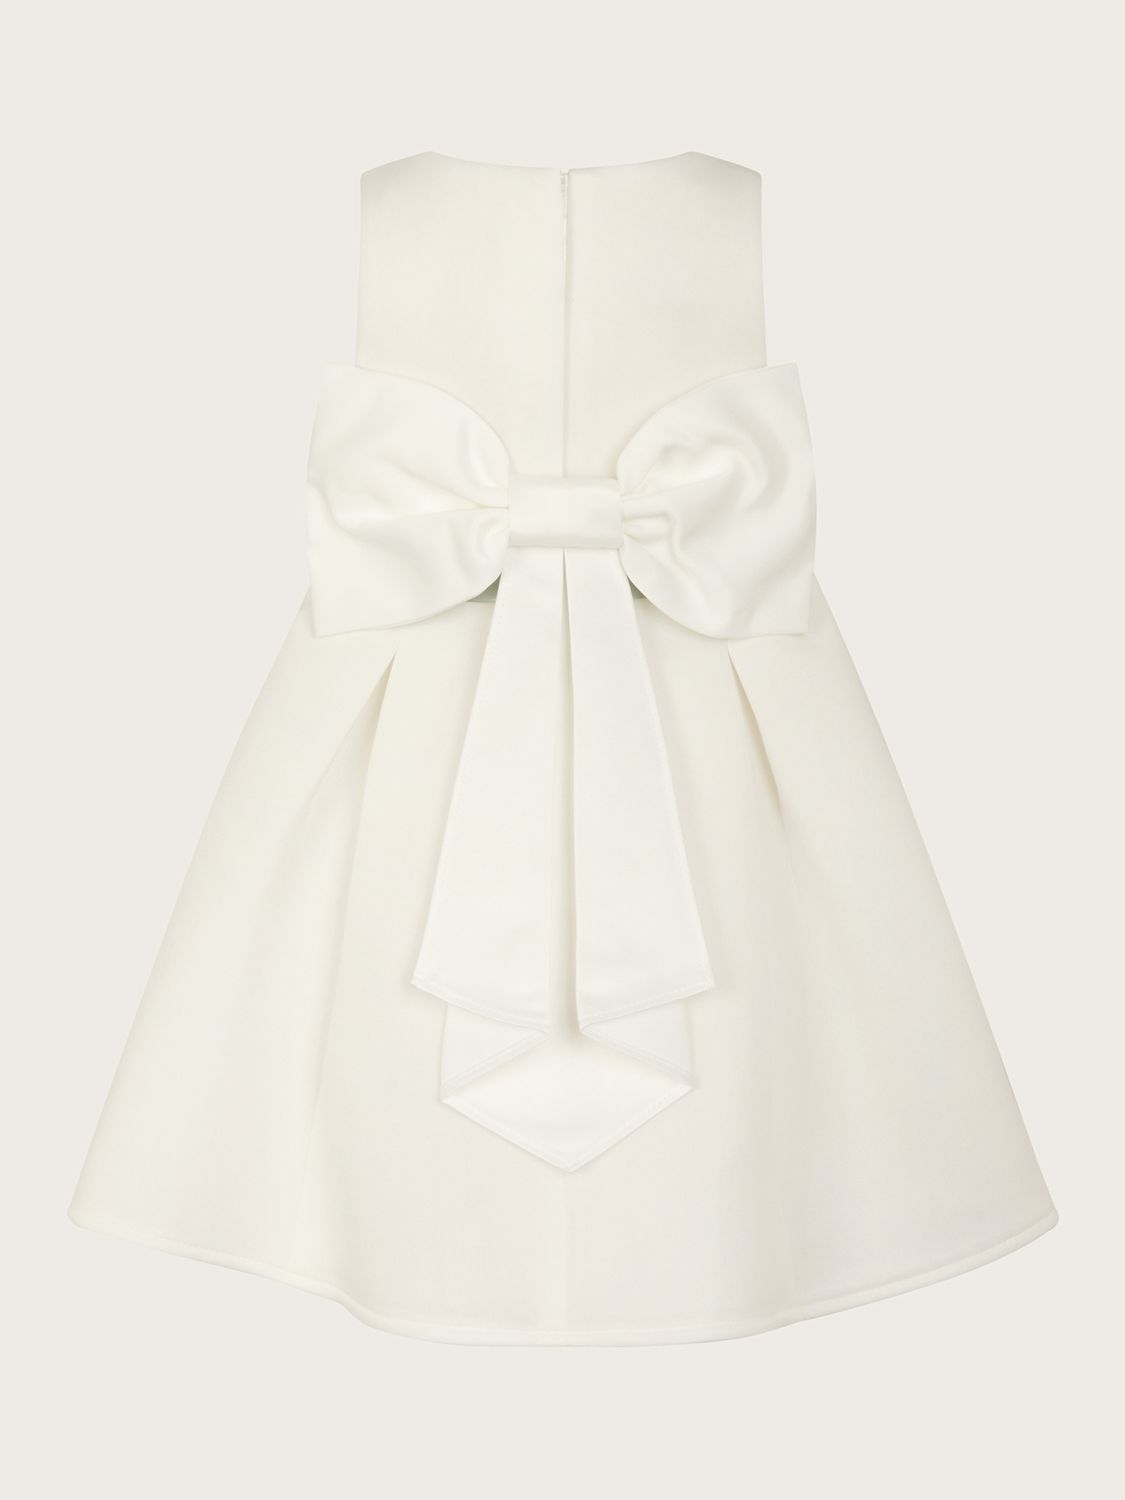 Monsoon Baby Holly Bow Scuba Bridemaids Dress, Ivory, 0-3 months